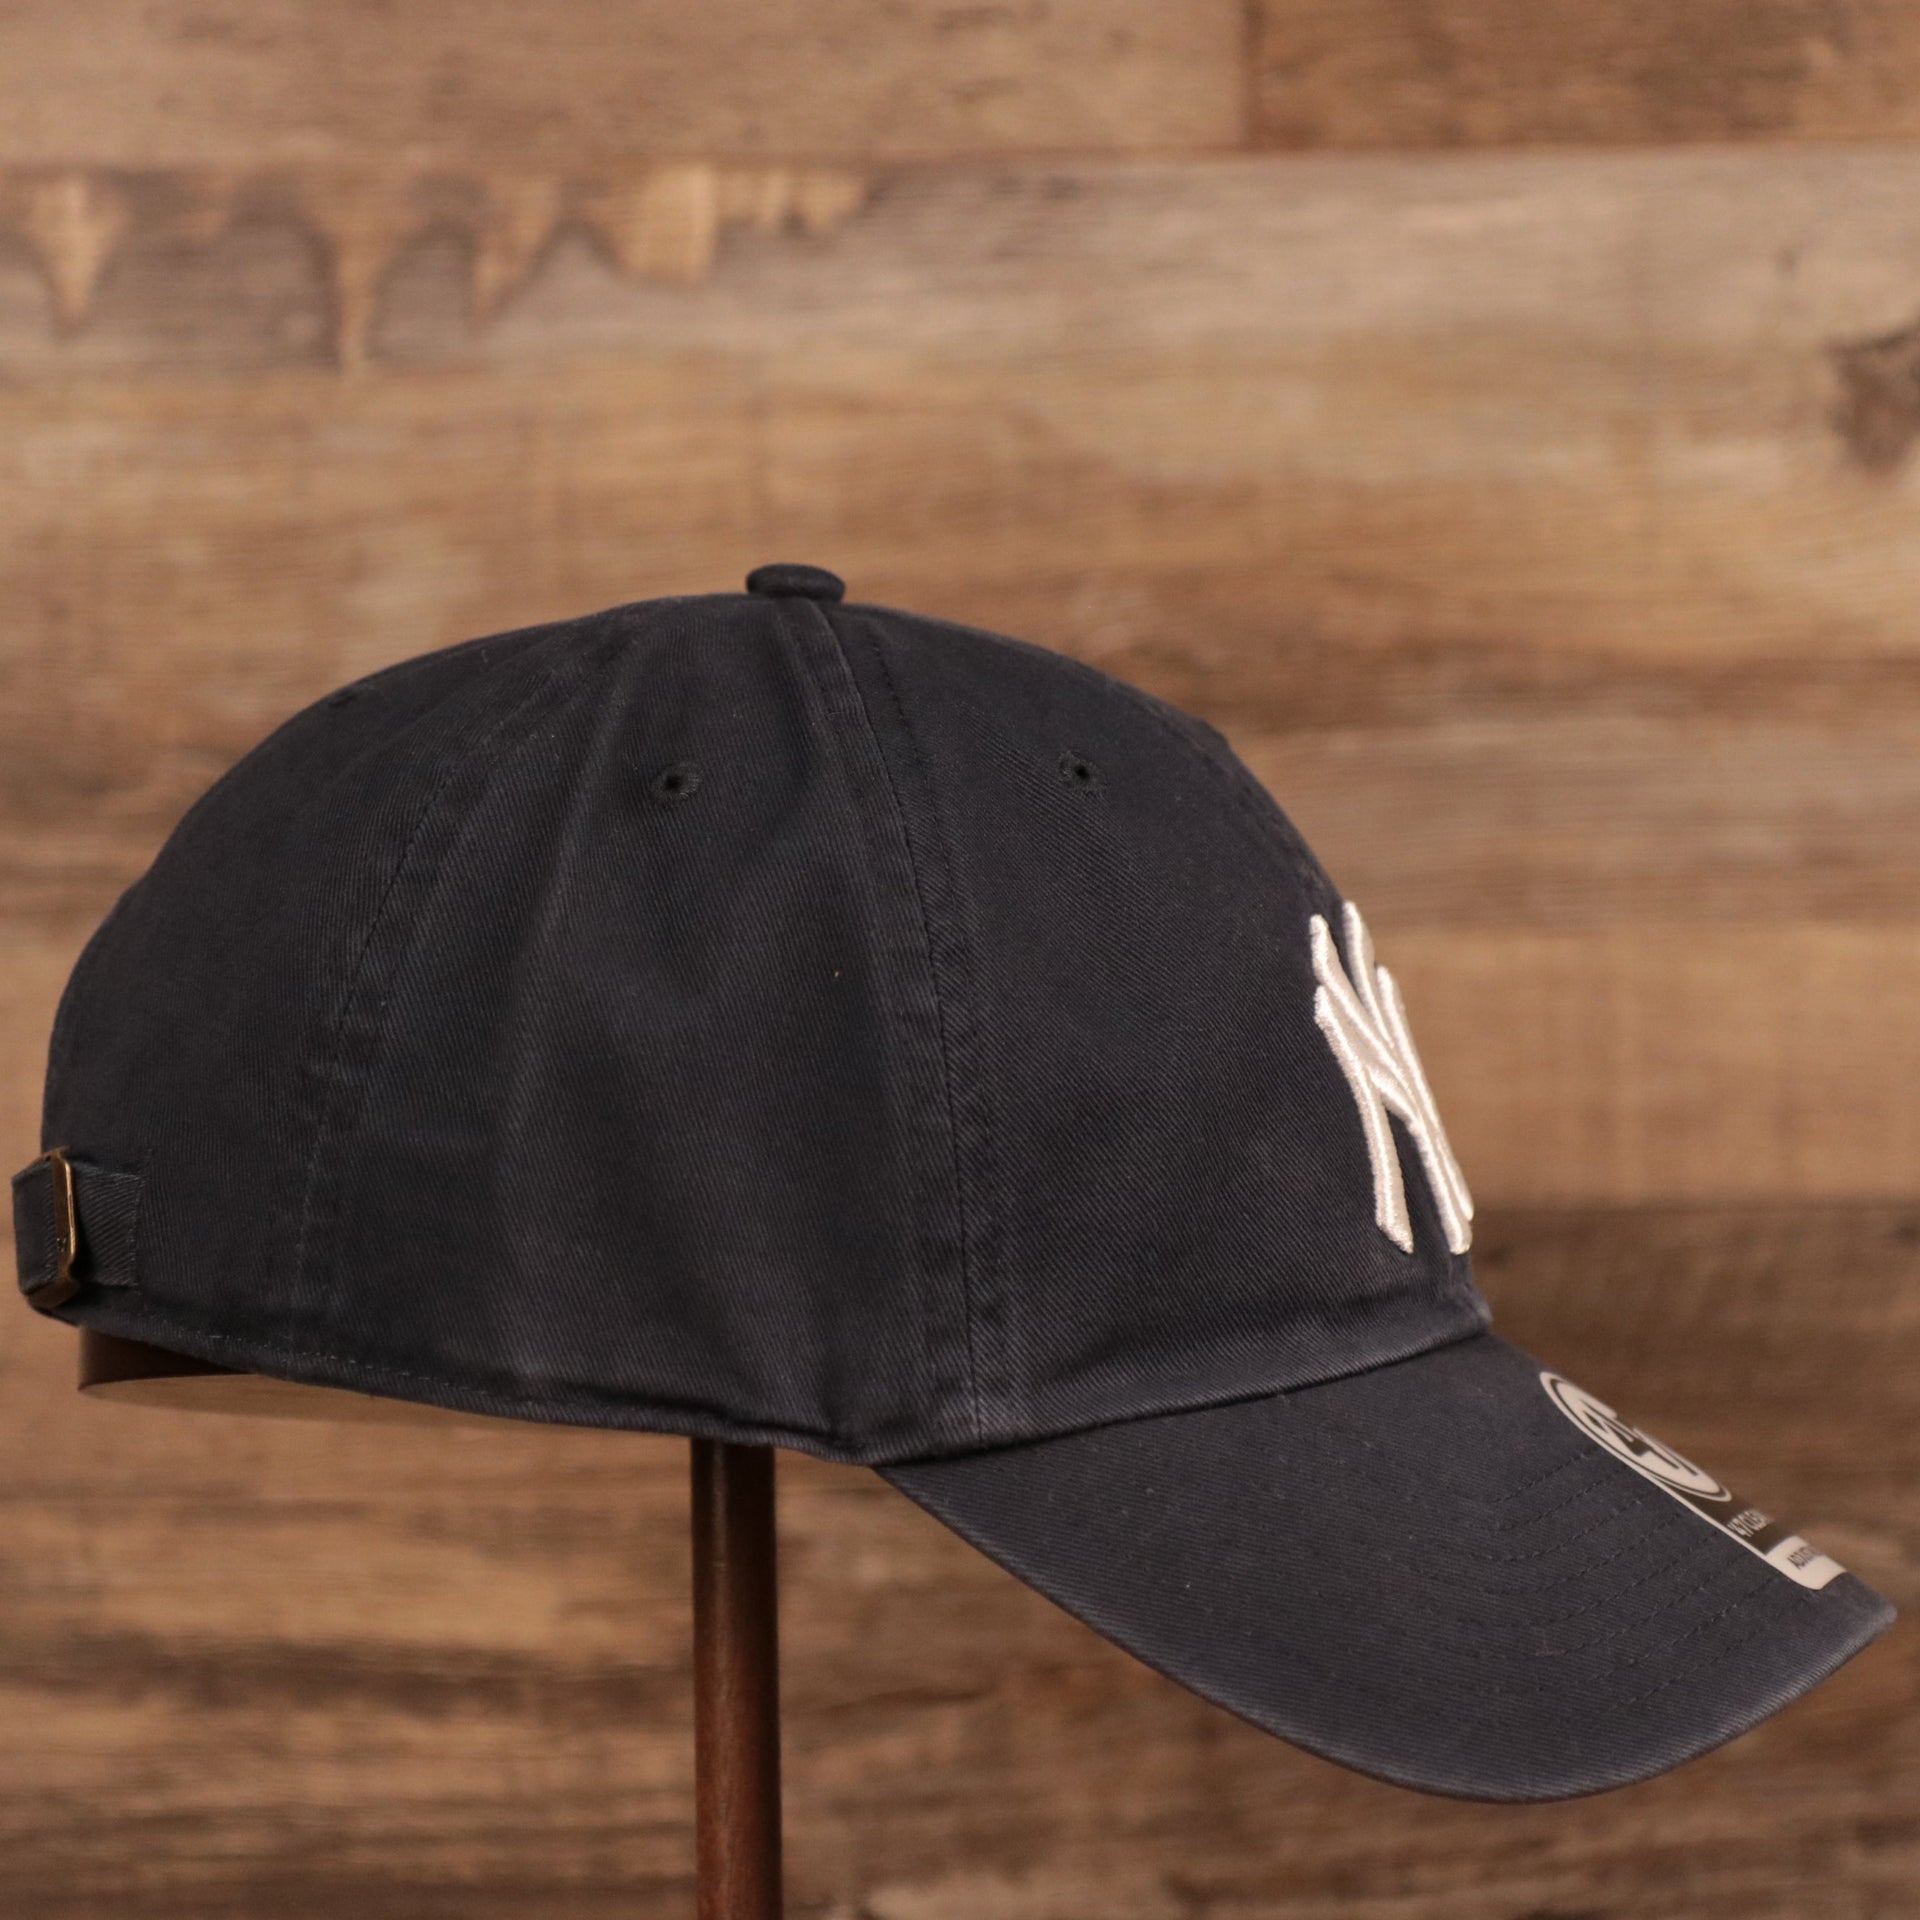 The right side of the cotton adjustable New York Yankees pink bottom hat.